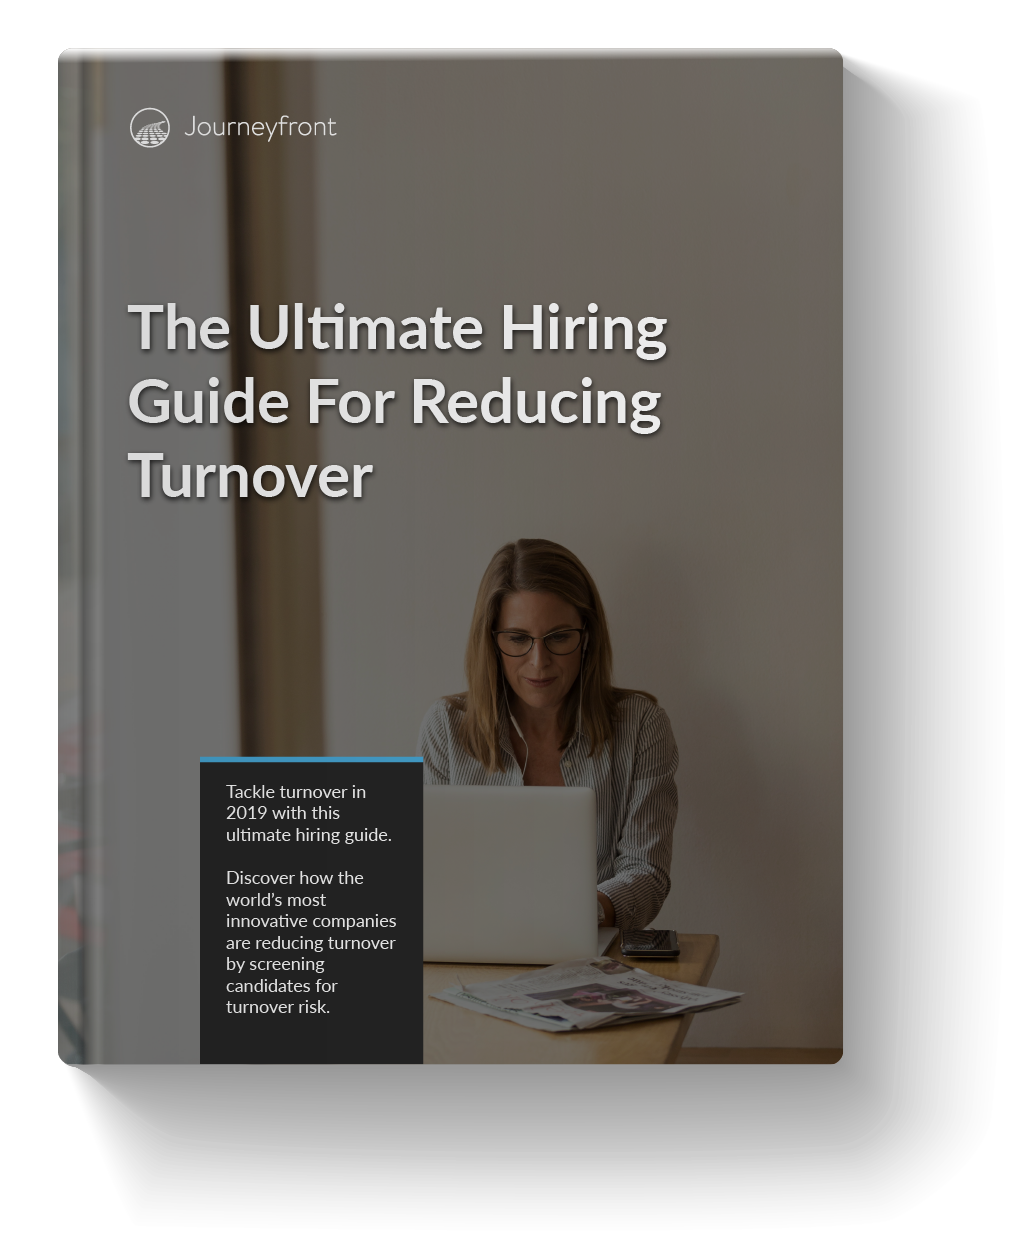 The Ultimate Hiring Guide for Reducing Turnover